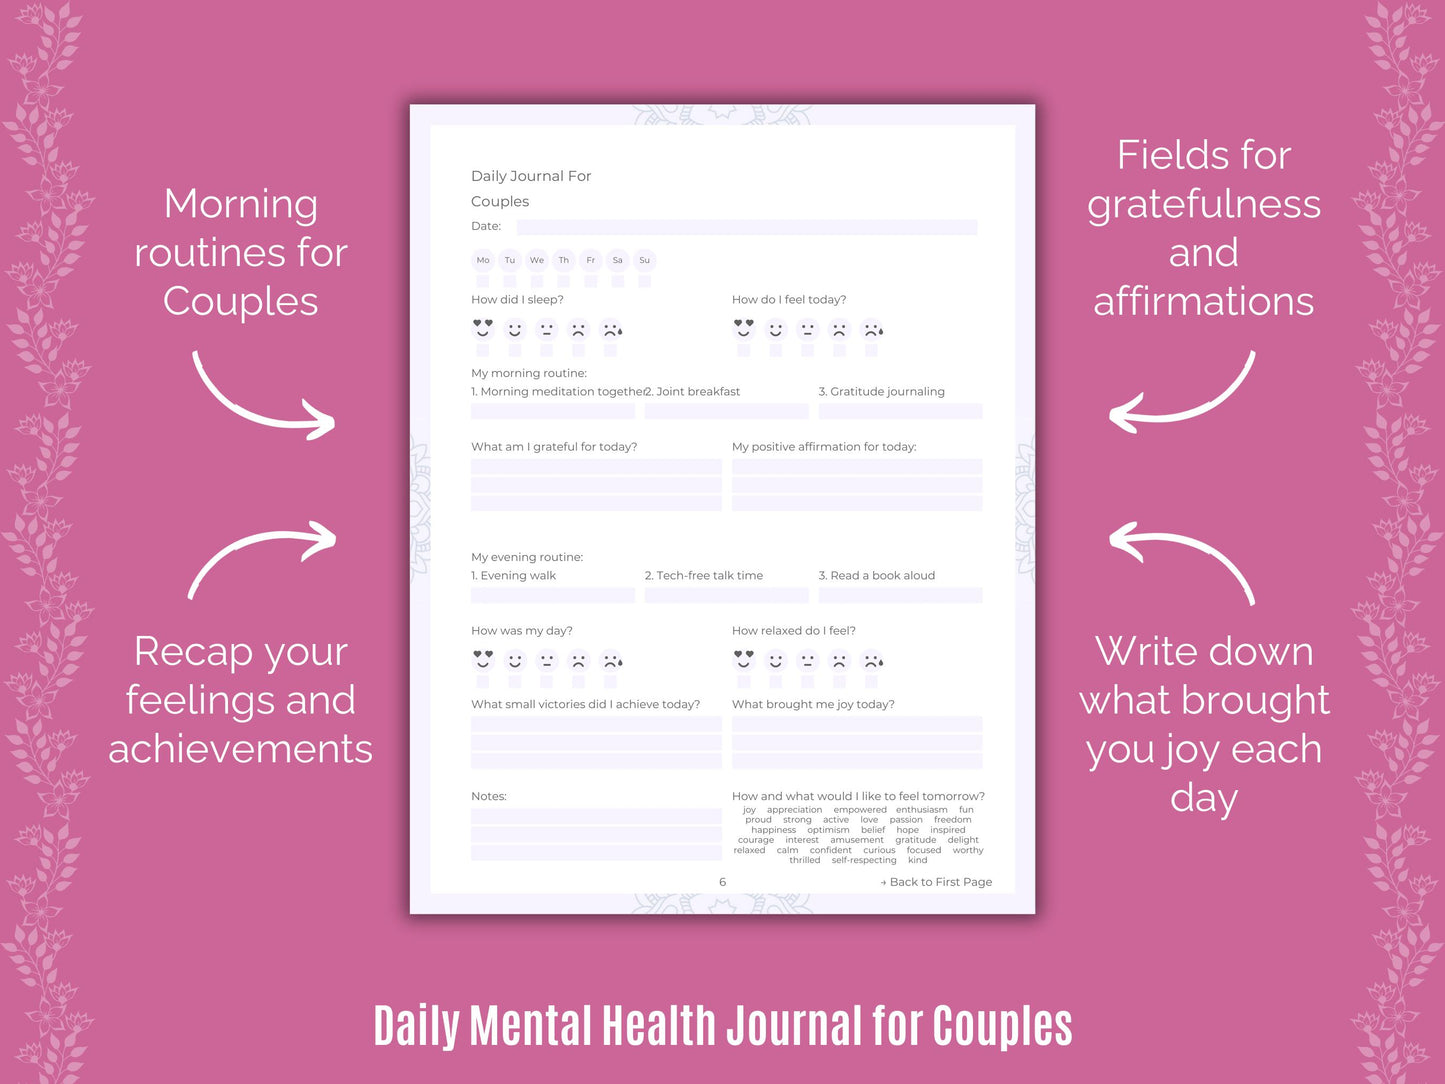 Couples Journals, Couples Therapy, Couples Counseling, Couples Planners, Couples Workbooks, Couples Goal Setting, Couples Tools, Couples Mental Health, Couples Resources, Couples Journaling, Couples Cheat Sheet, Couples Templates, Couples Notes